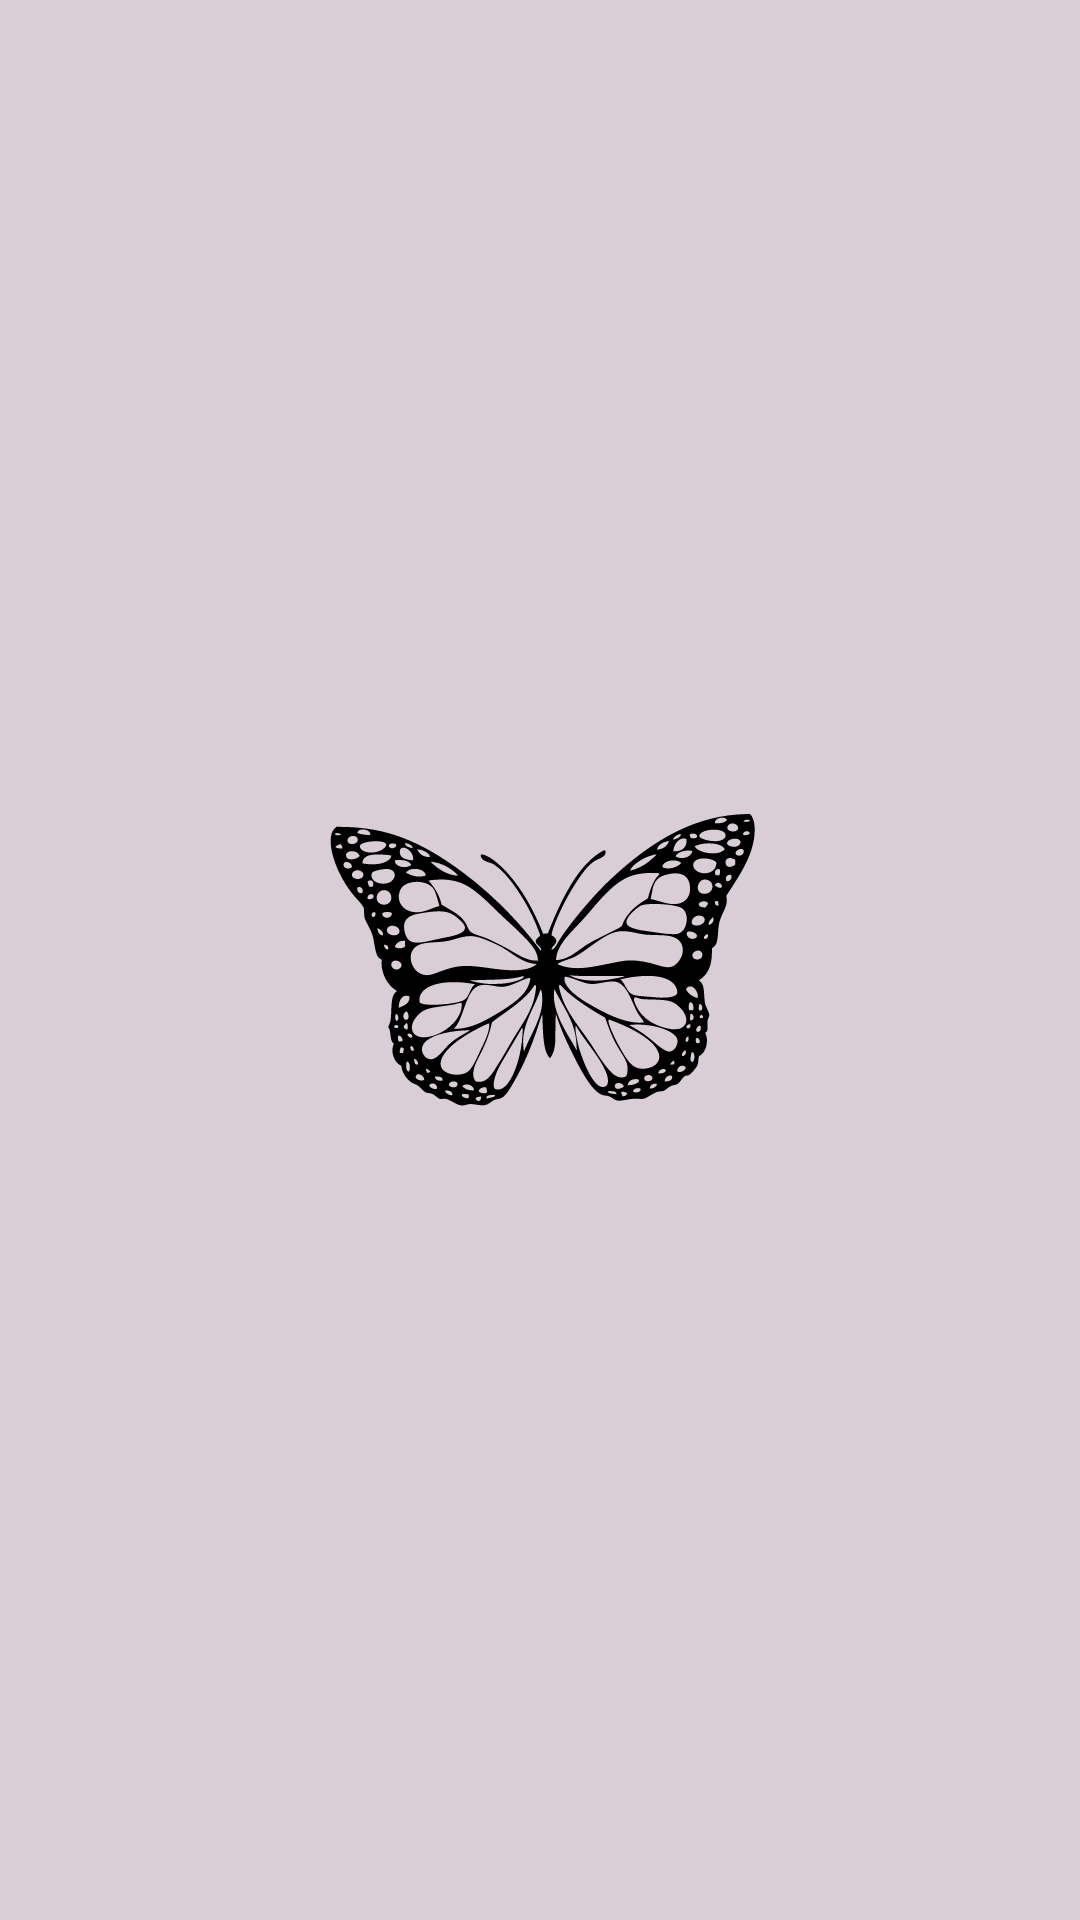 500 Black Butterfly Pictures HD  Download Free Images on Unsplash